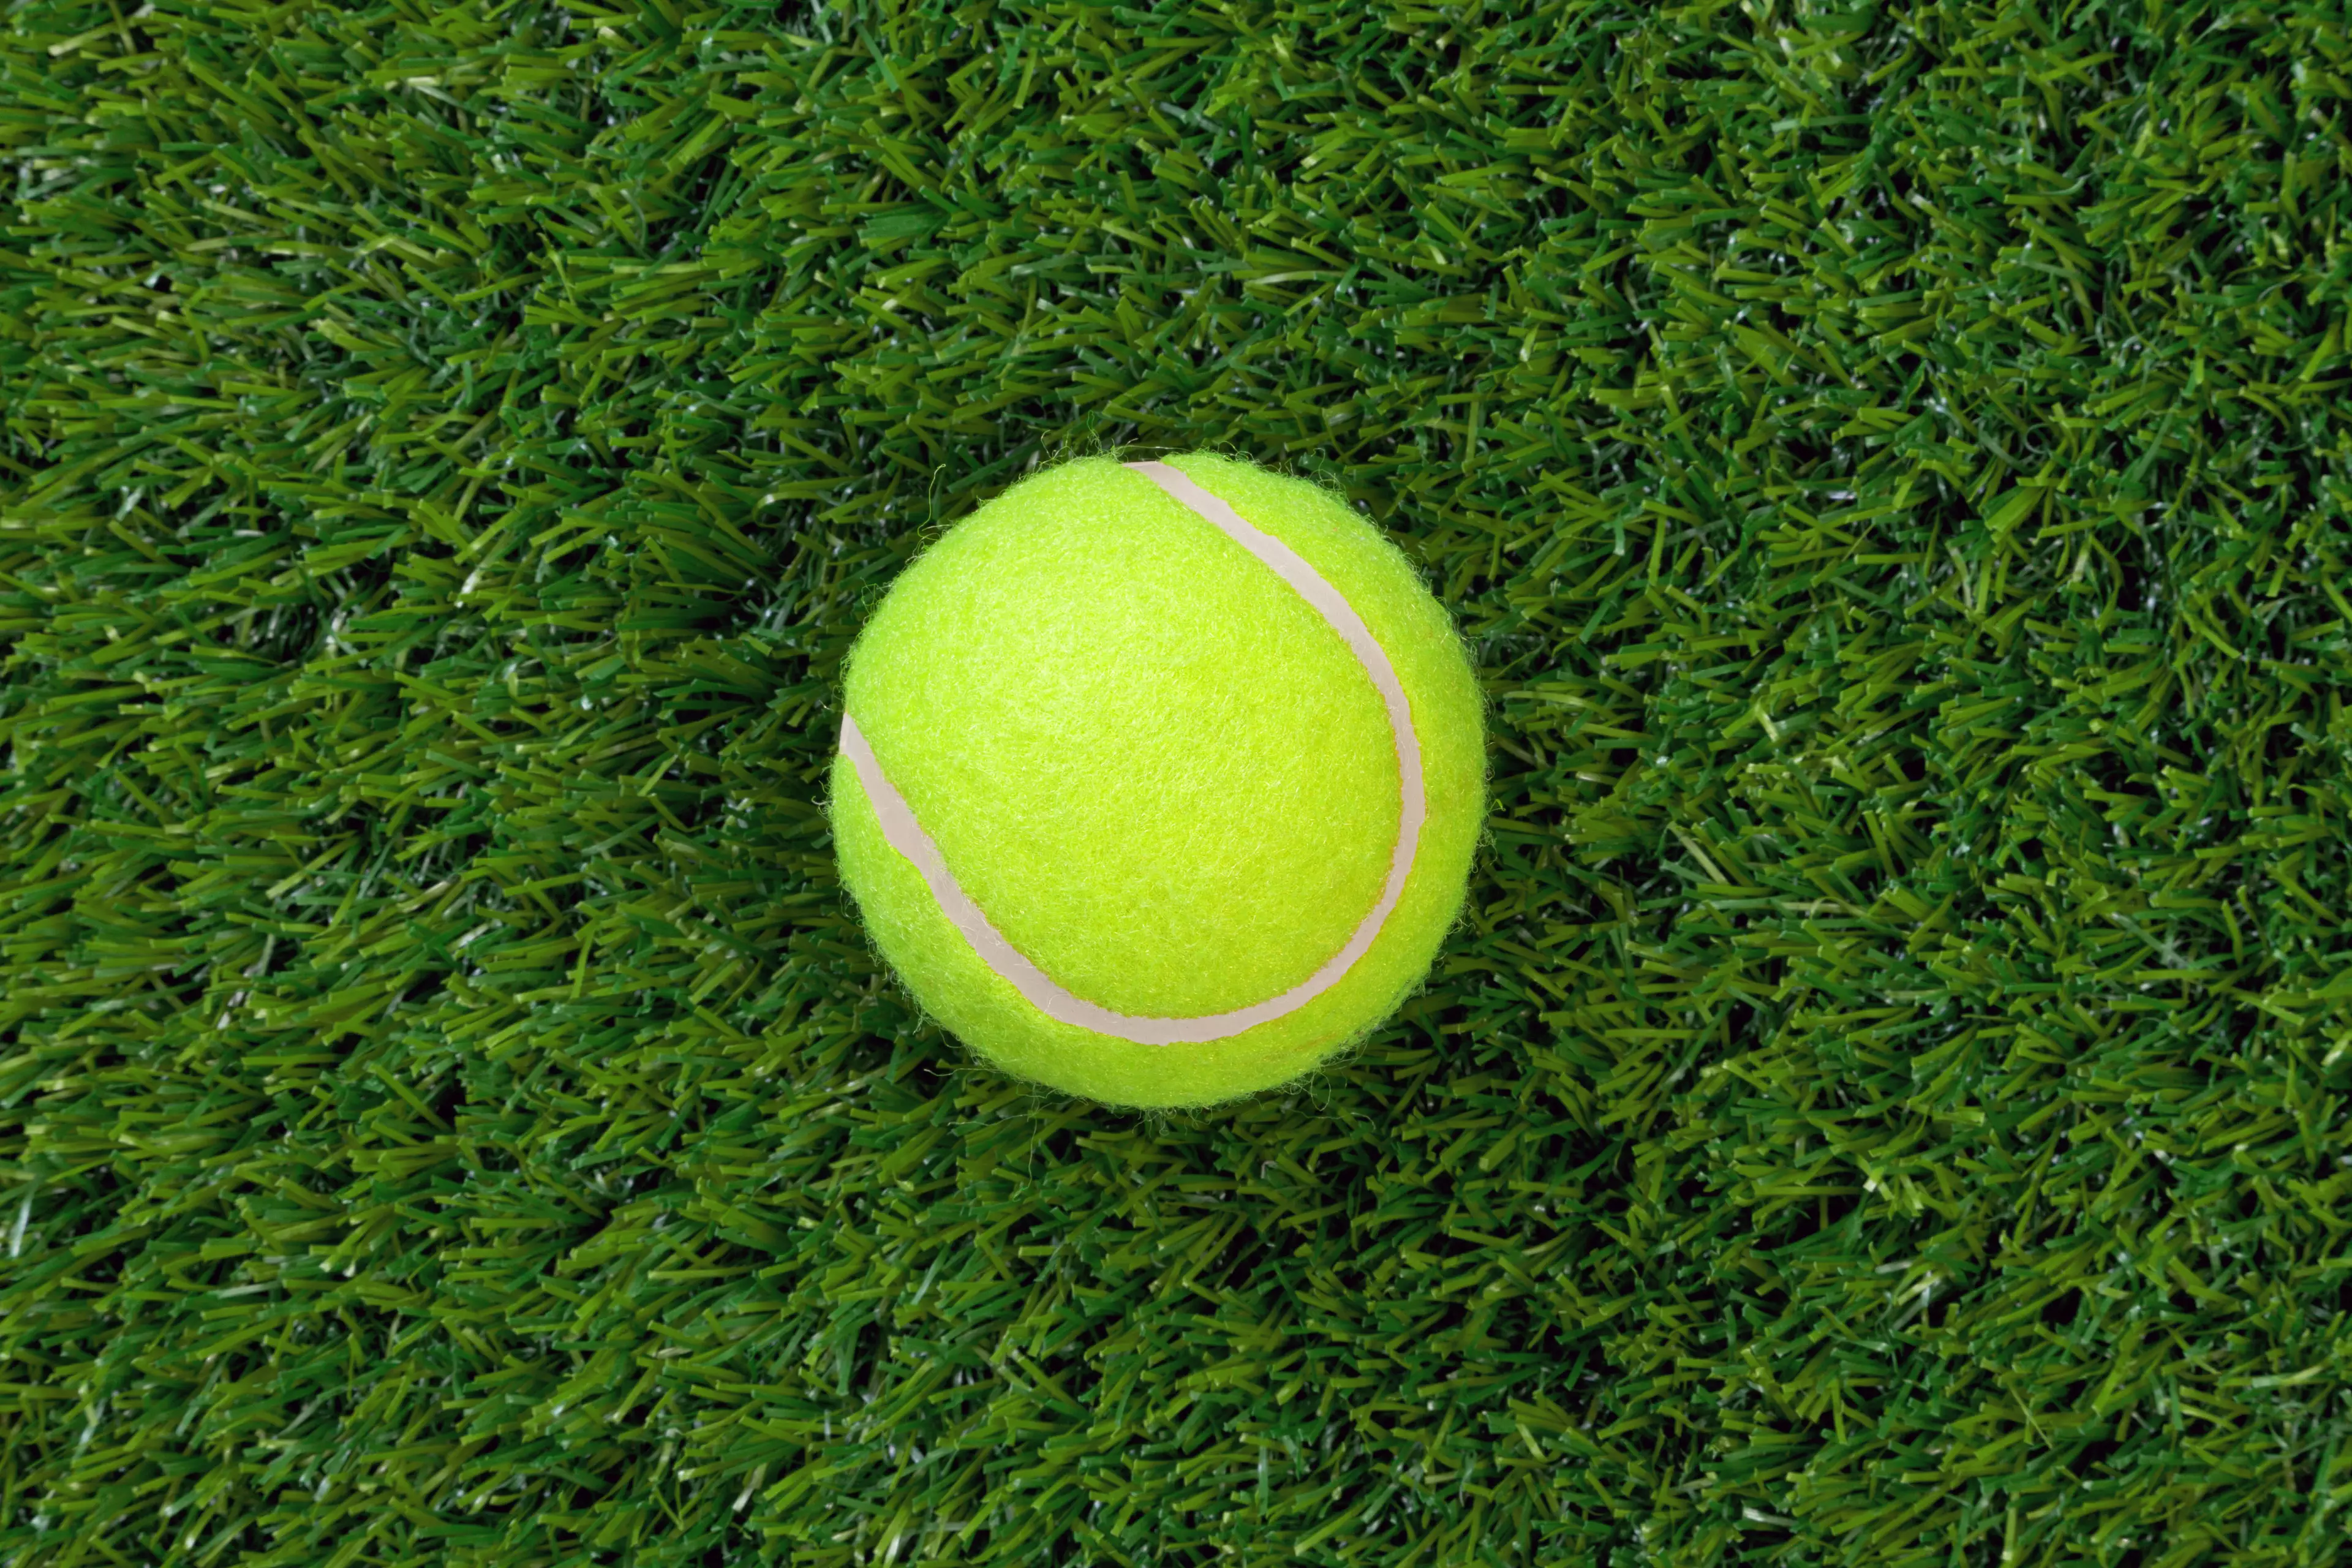 People are now debating the colour of a tennis ball. (